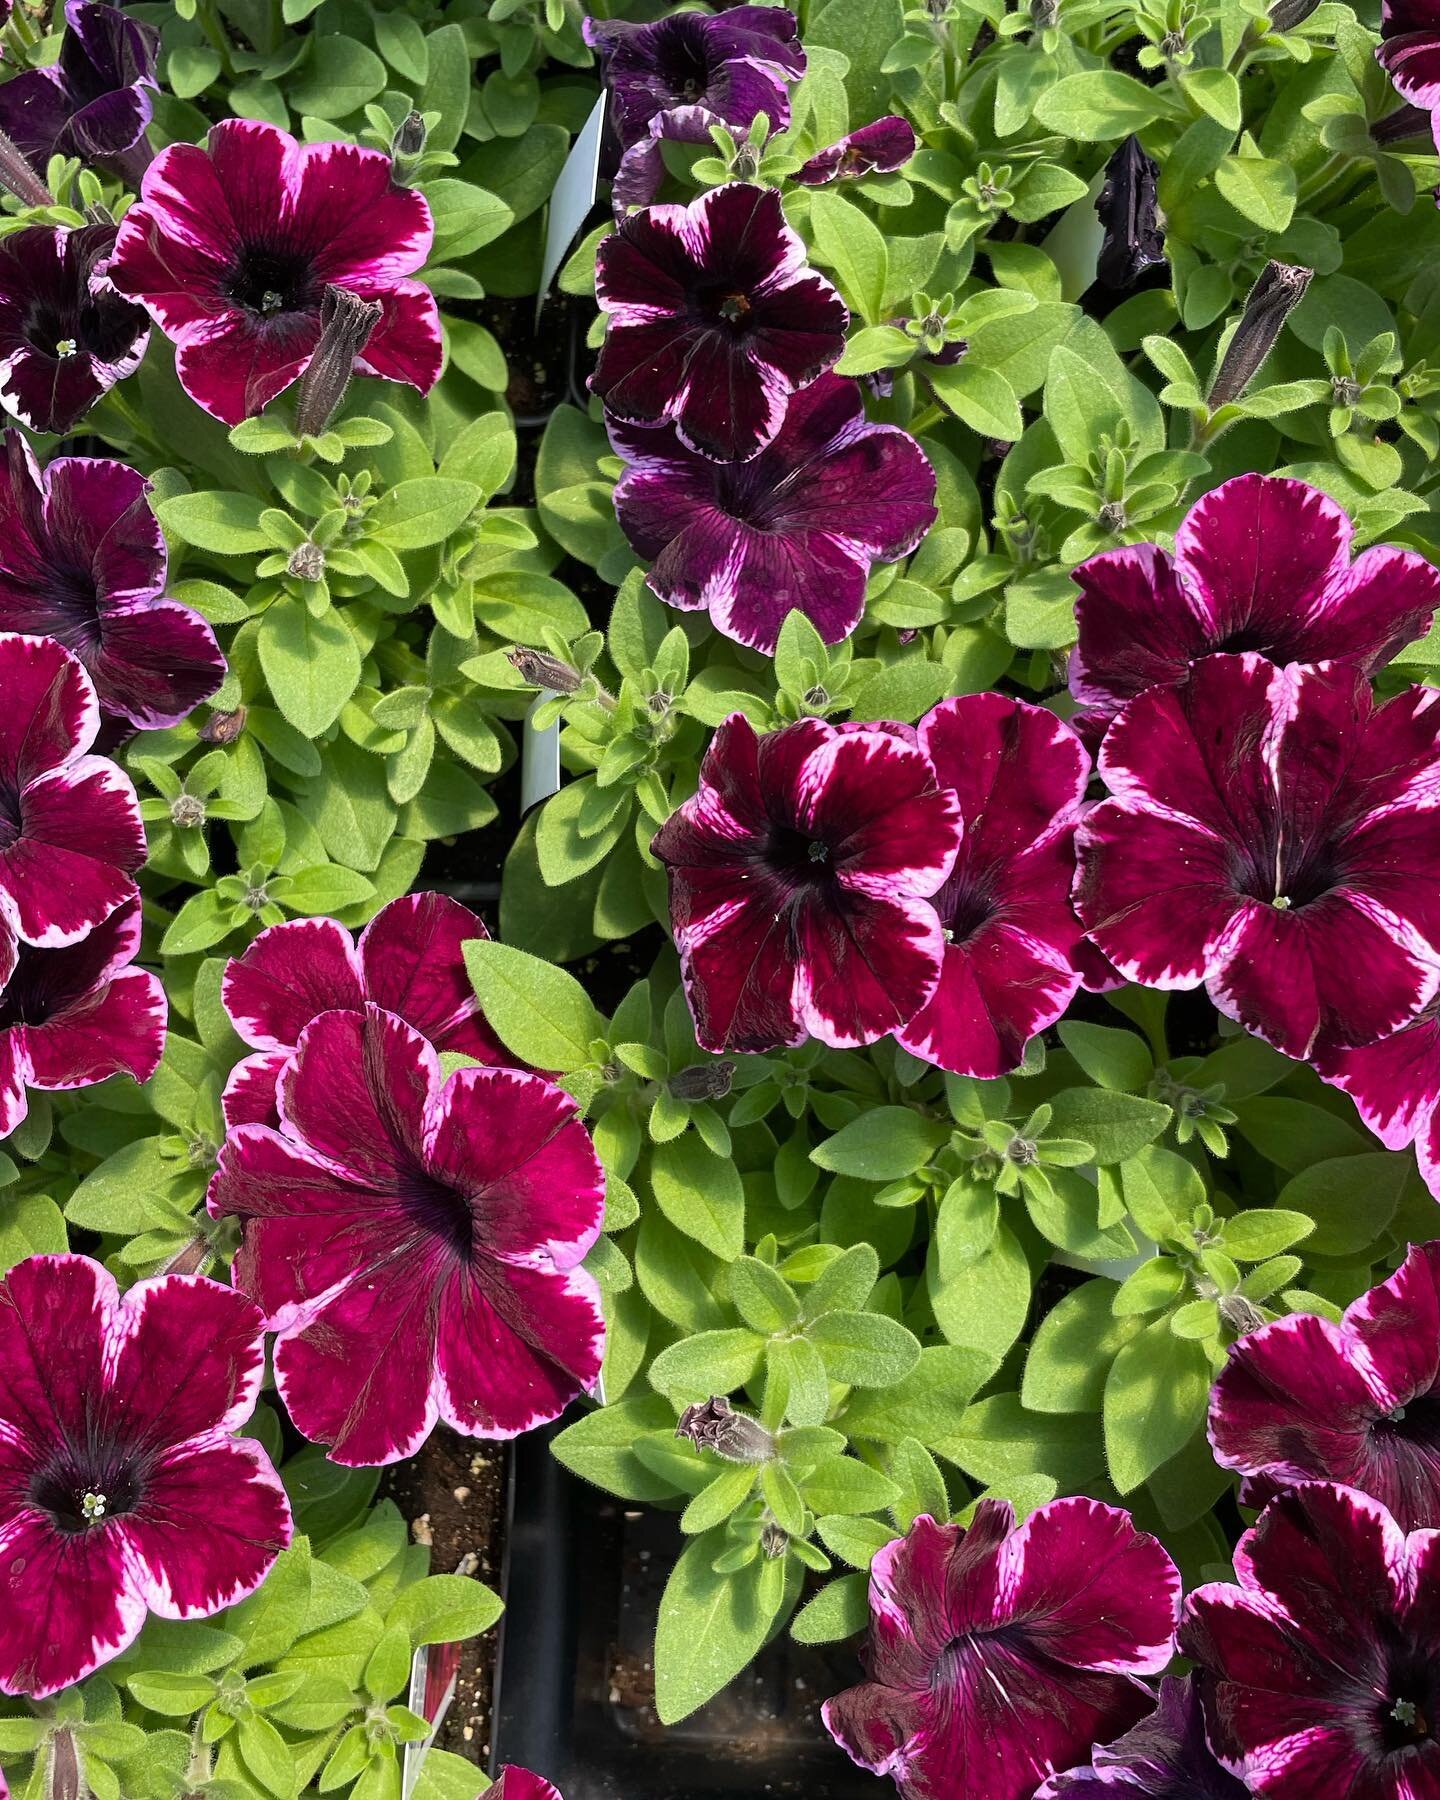 Want to maximize your curb appeal? Petunias are the answer! 

They look great in window boxes, container gardens, and of course, planted right in the ground. Best of all: these annuals bloom all the way through September!
.
.
.
#thegreenthumb #greent